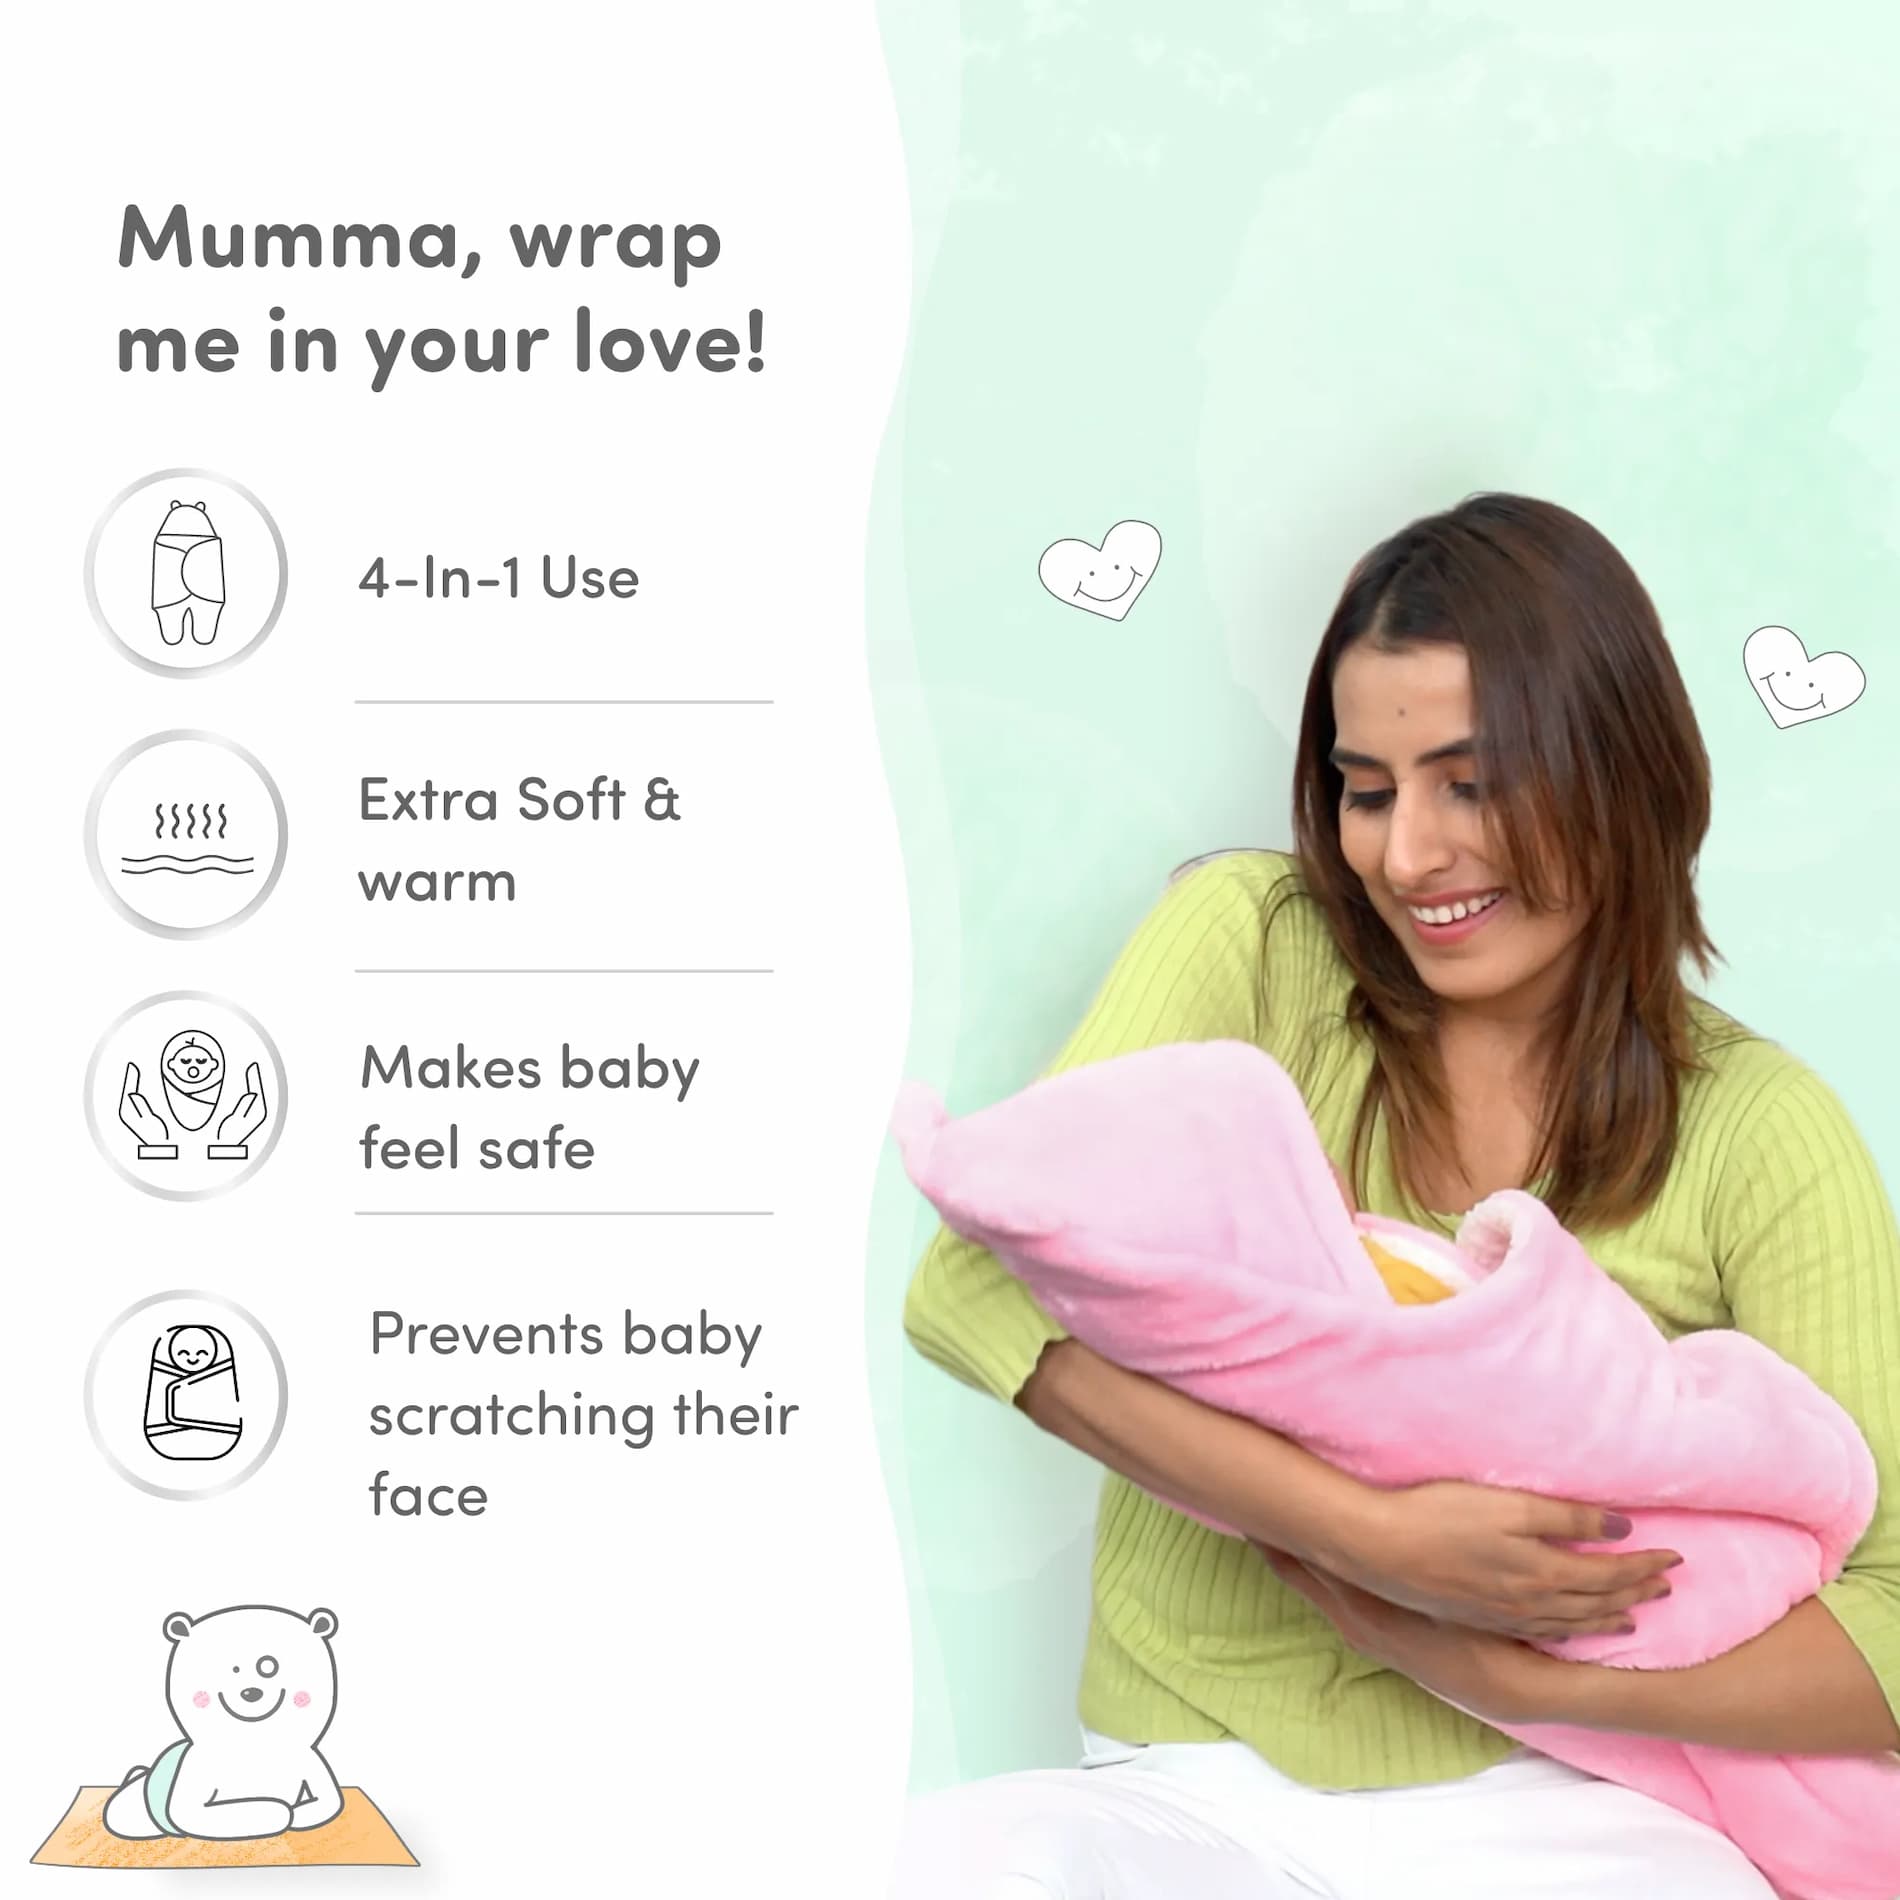 4-in-1 All Season Baby Swaddle-Wrapper For New Born Baby (0-6 months) - Mint Green & Light Brown - pack of 2